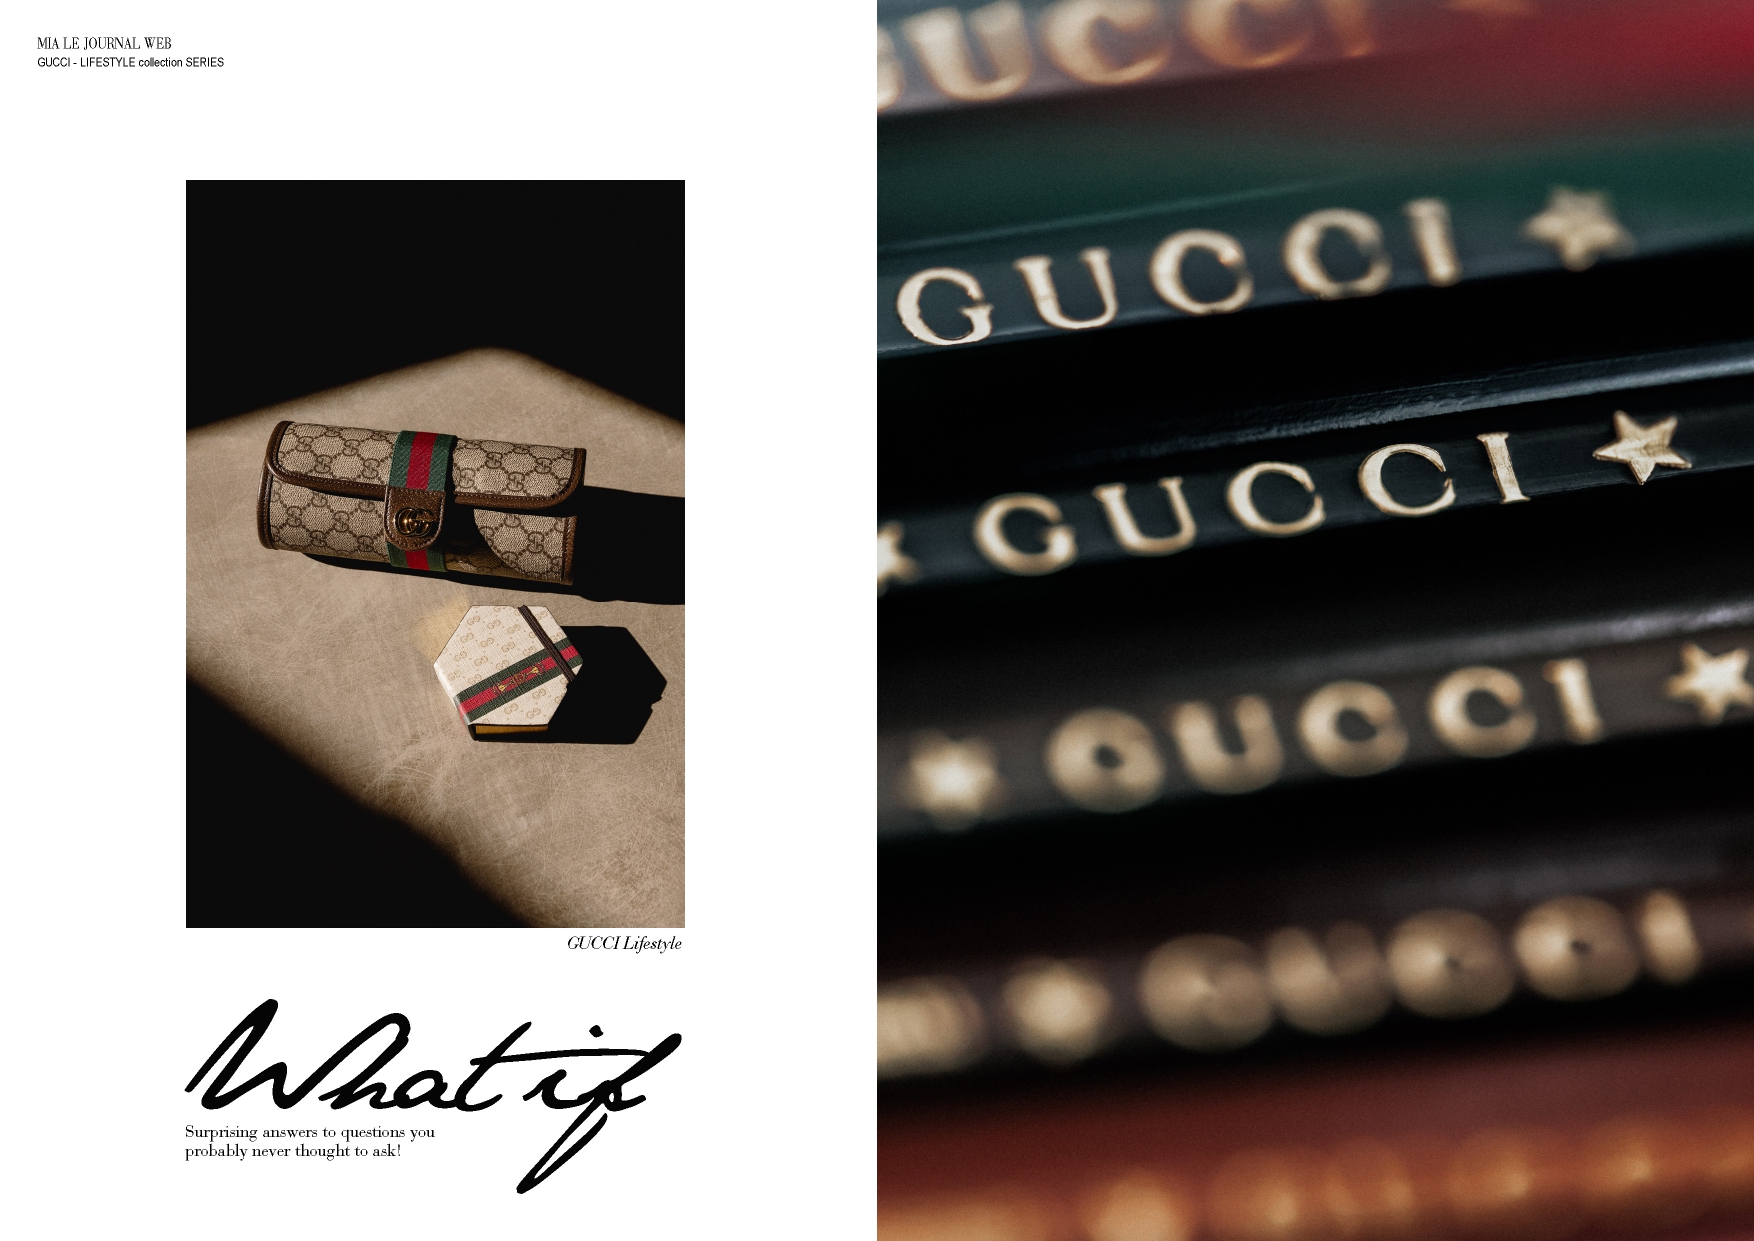 Gucci Coloring Pencil Set with Double G